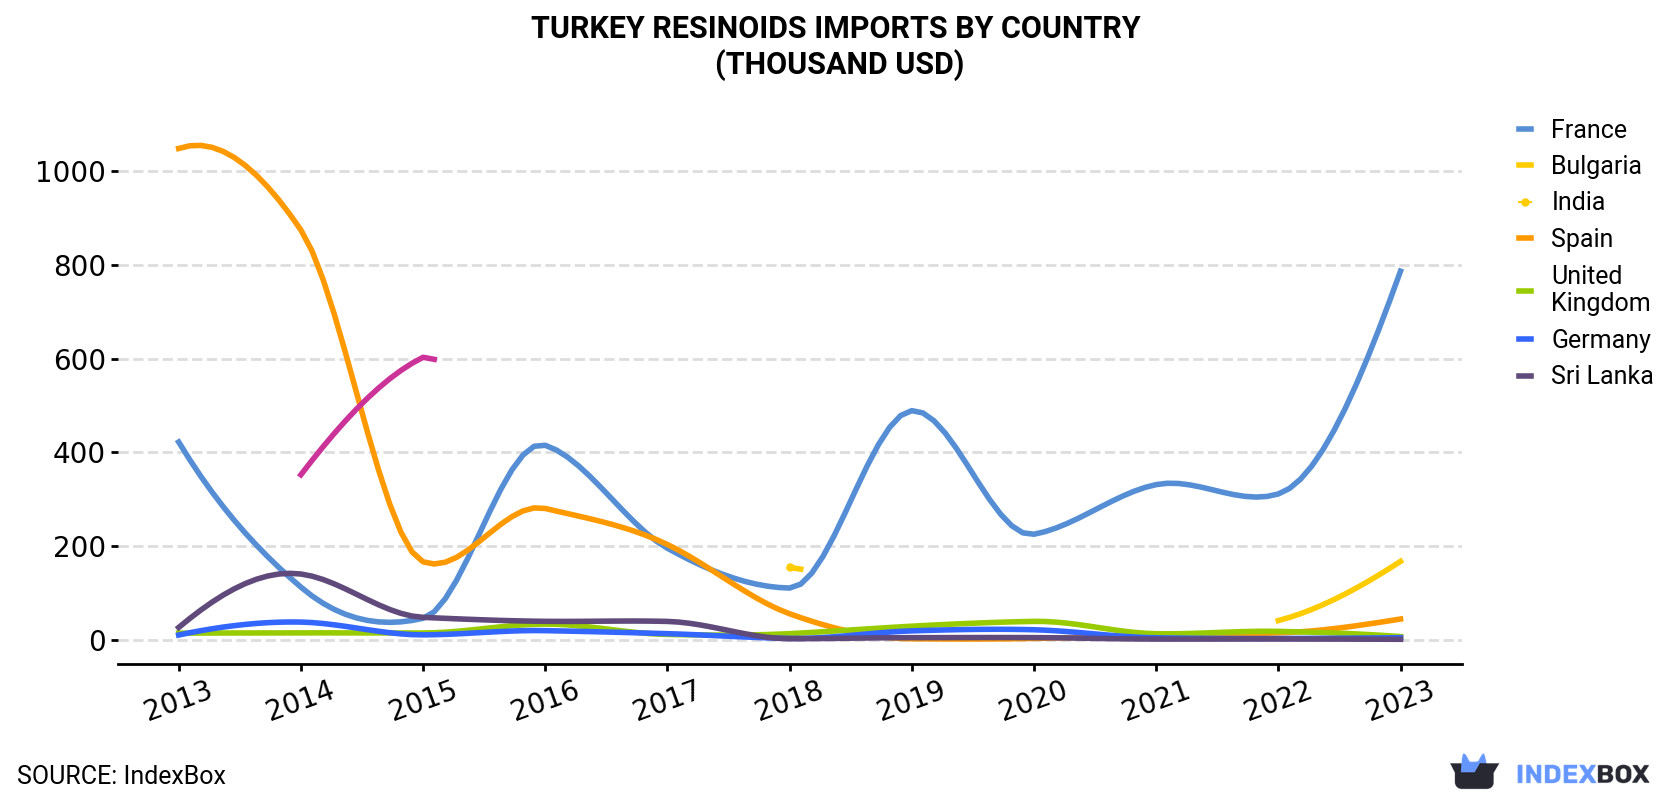 Turkey Resinoids Imports By Country (Thousand USD)